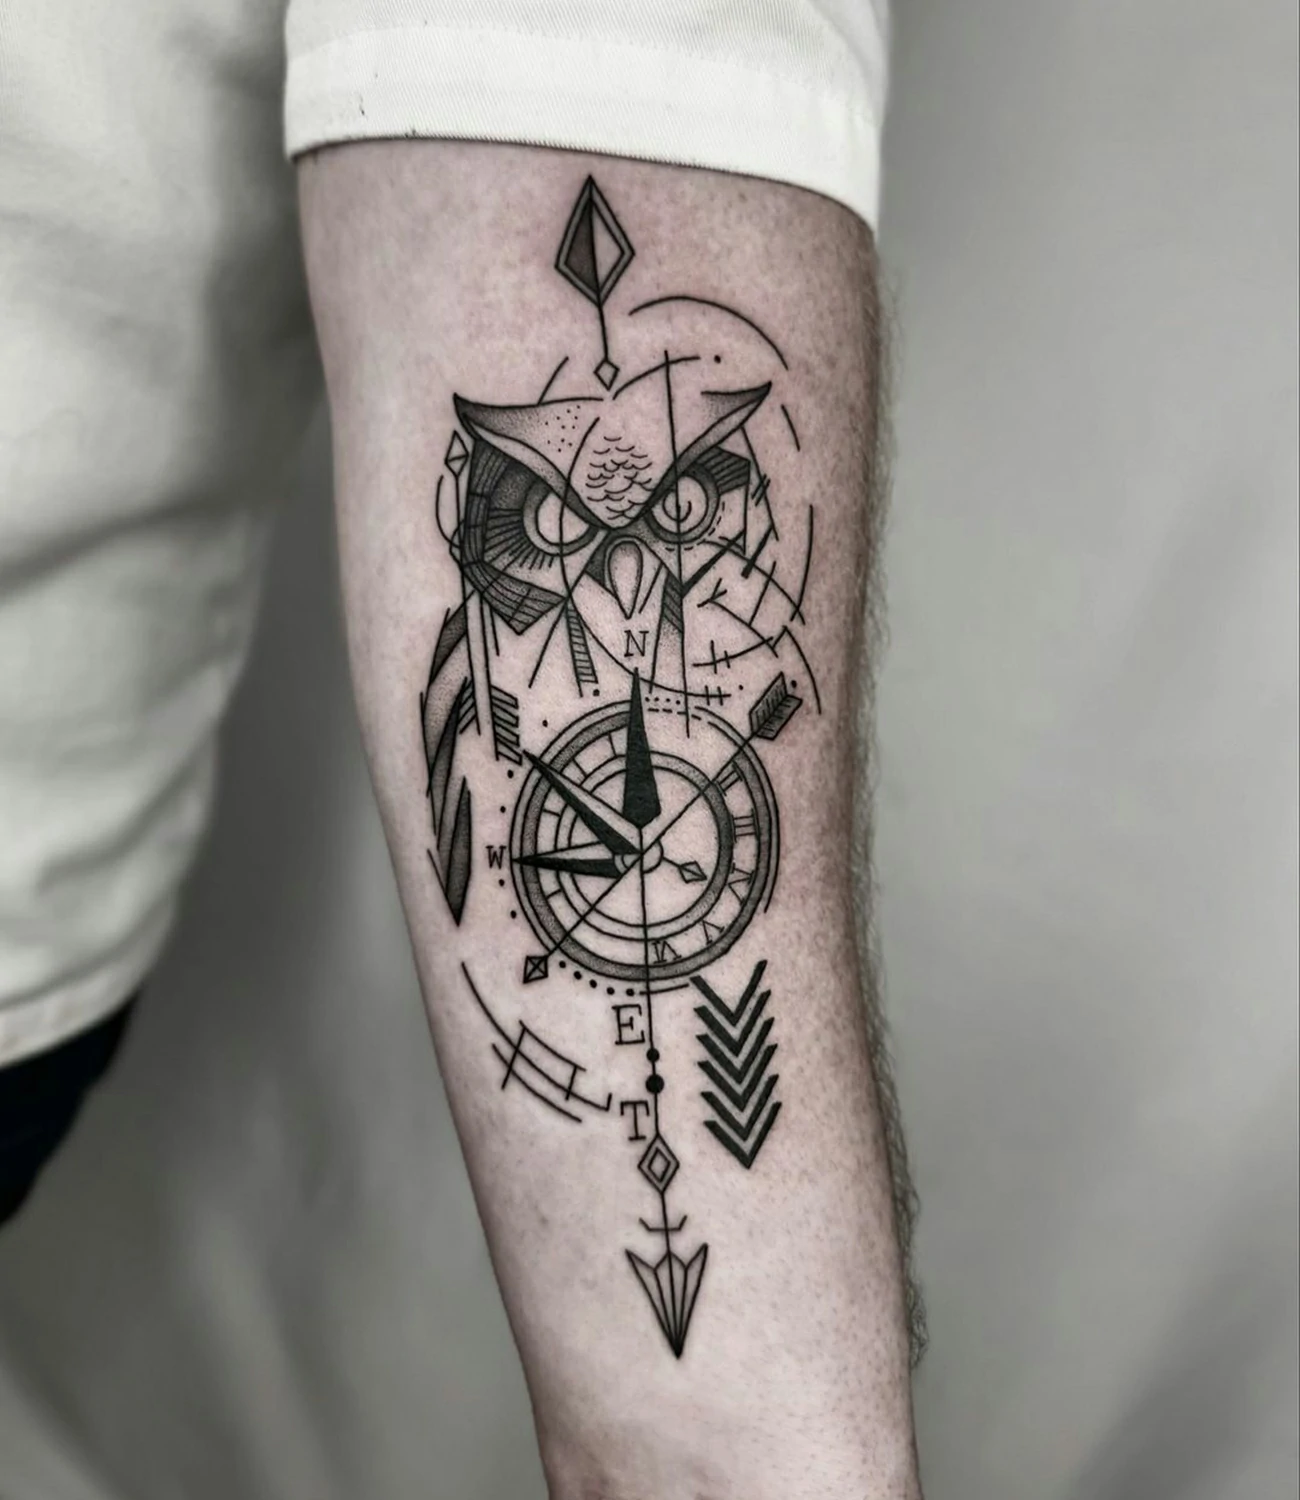 Geometric Owl Tattoo: Geometric owl tattoos combine the wisdom of the owl with precise geometric shapes, symbolizing knowledge and mystery.